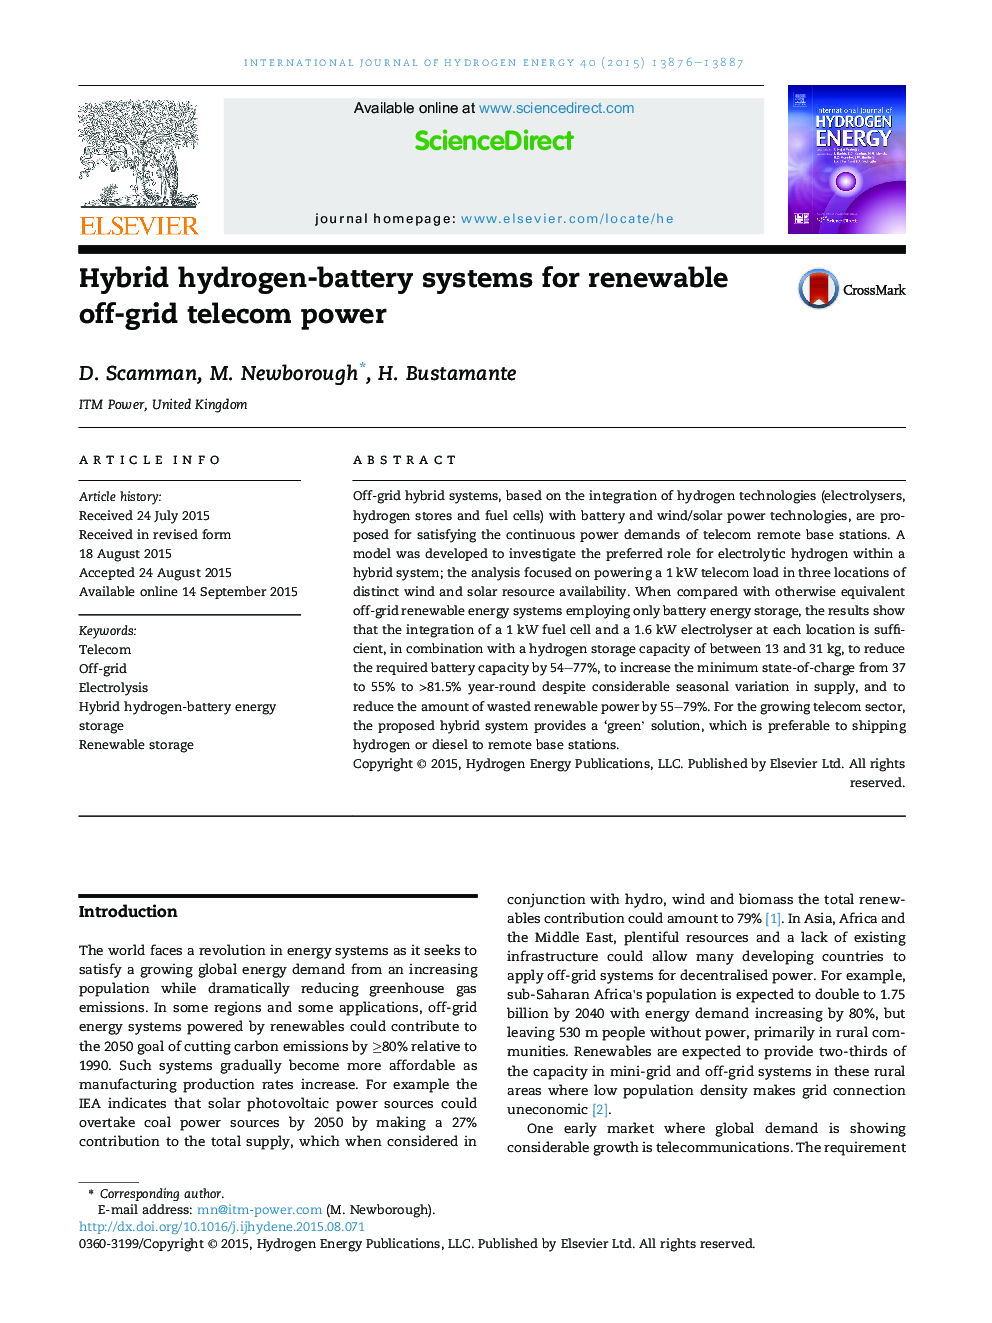 Hybrid hydrogen-battery systems for renewable off-grid telecom power